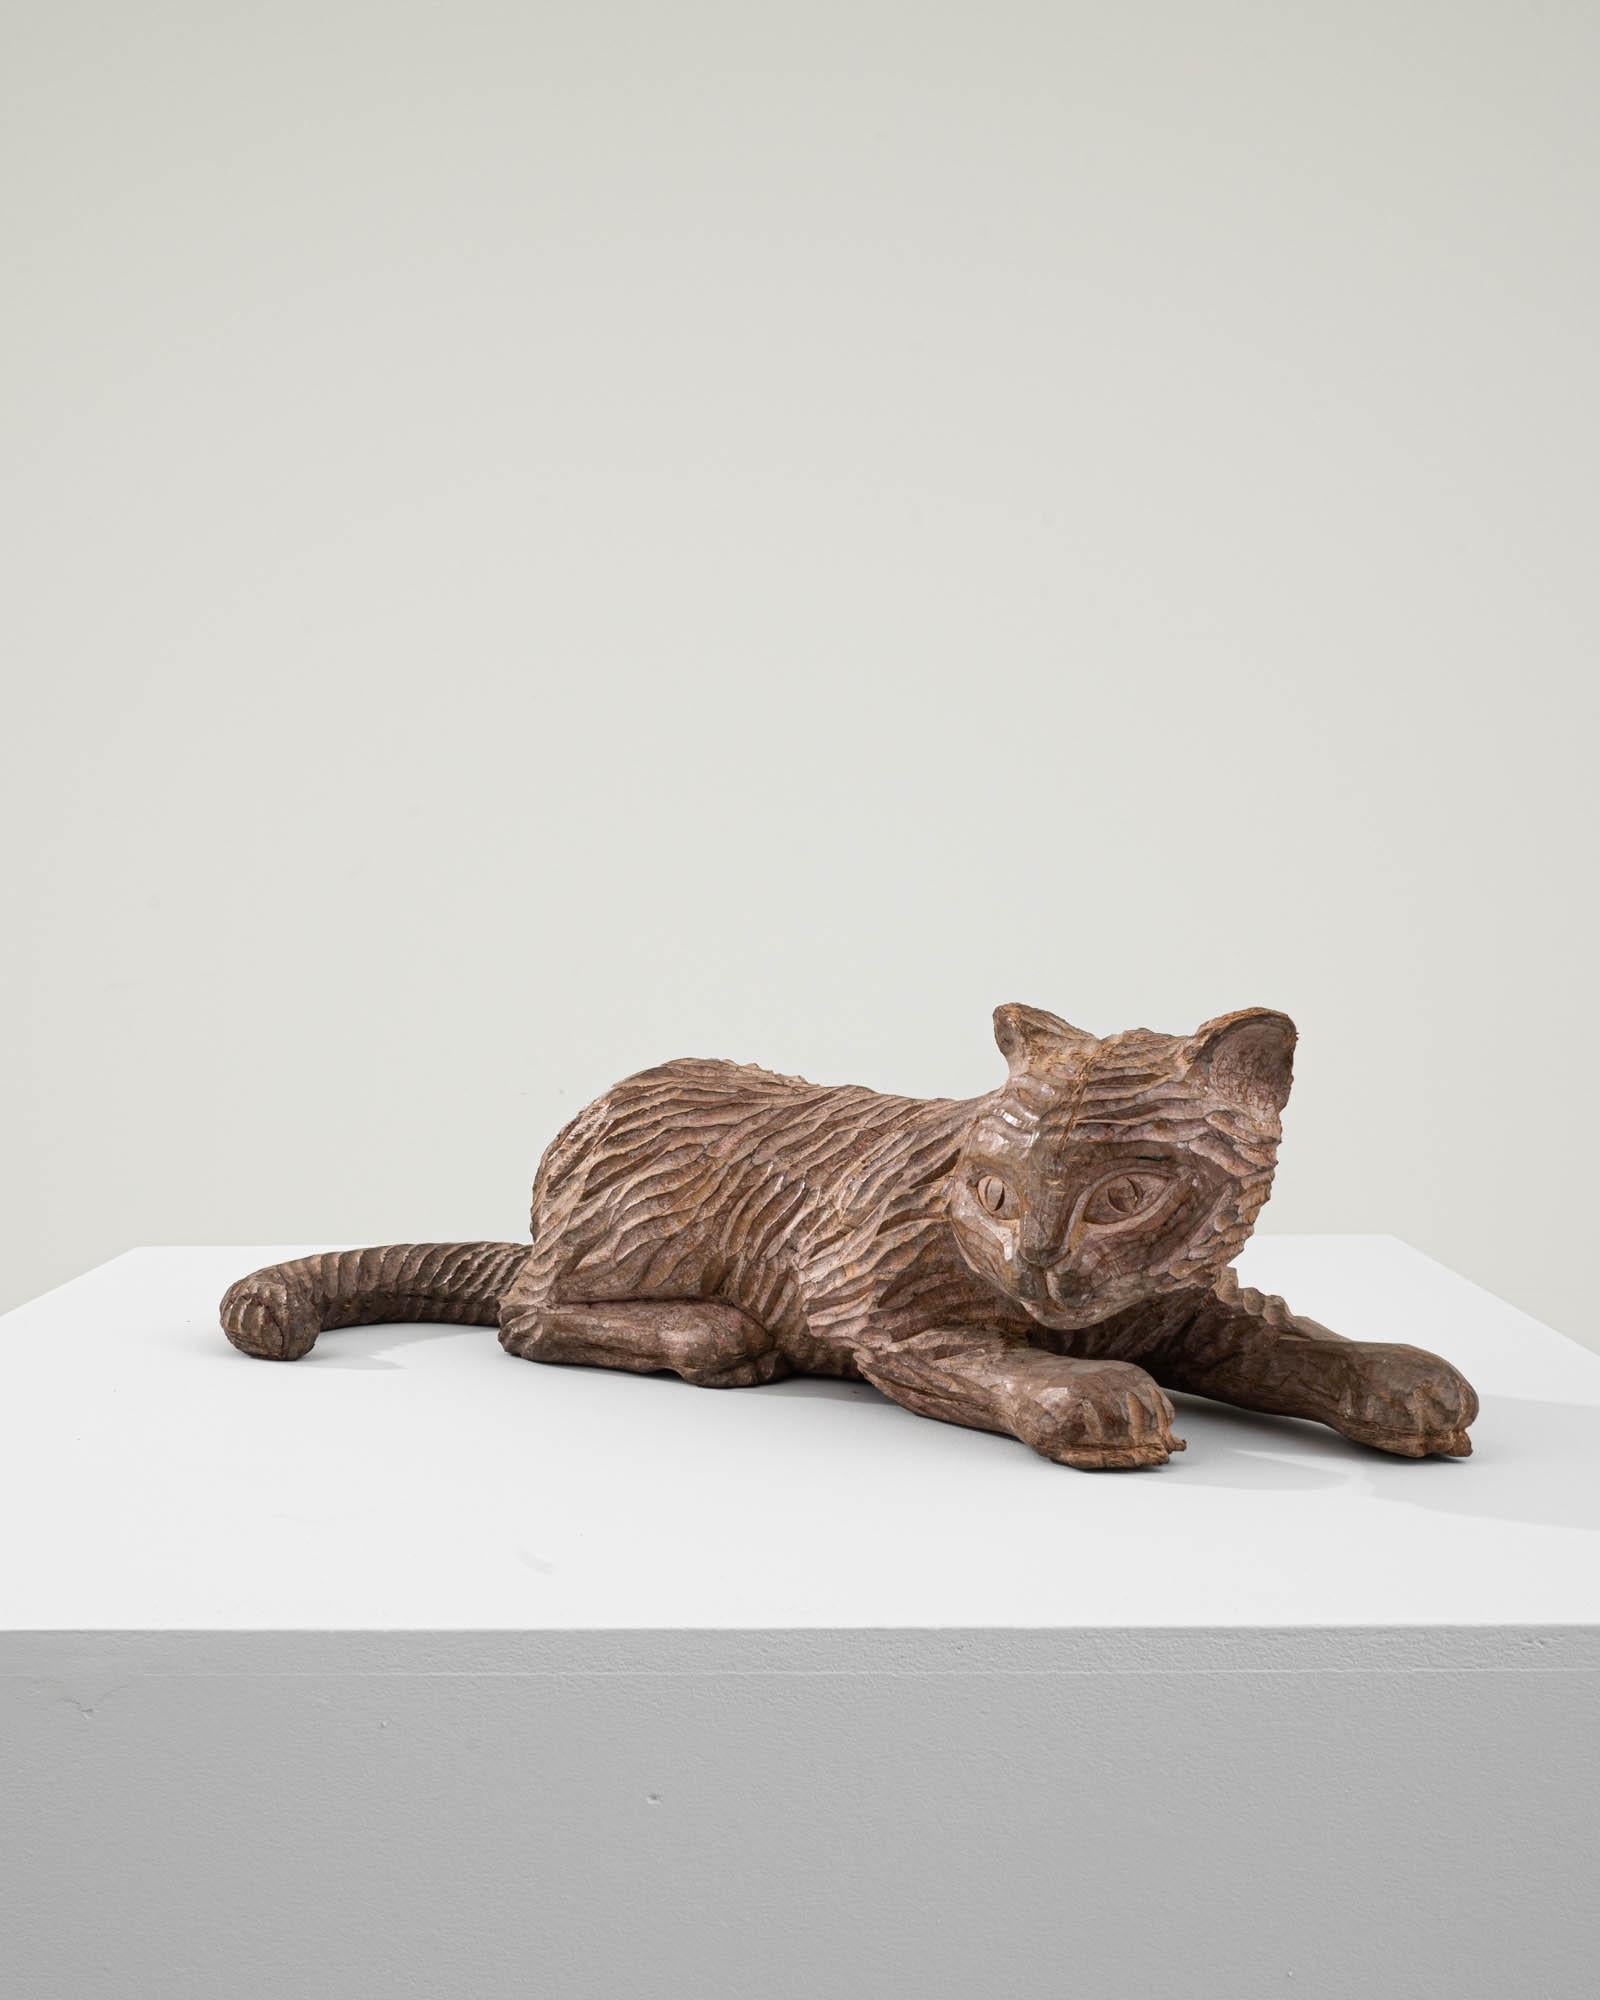 Indulge in the charming appeal of this 20th-century French Carved Wooden Cat Decoration. Crafted with meticulous attention to detail, this reclining cat figure exudes an aura of relaxation and contentment. The intricate carving captures the essence